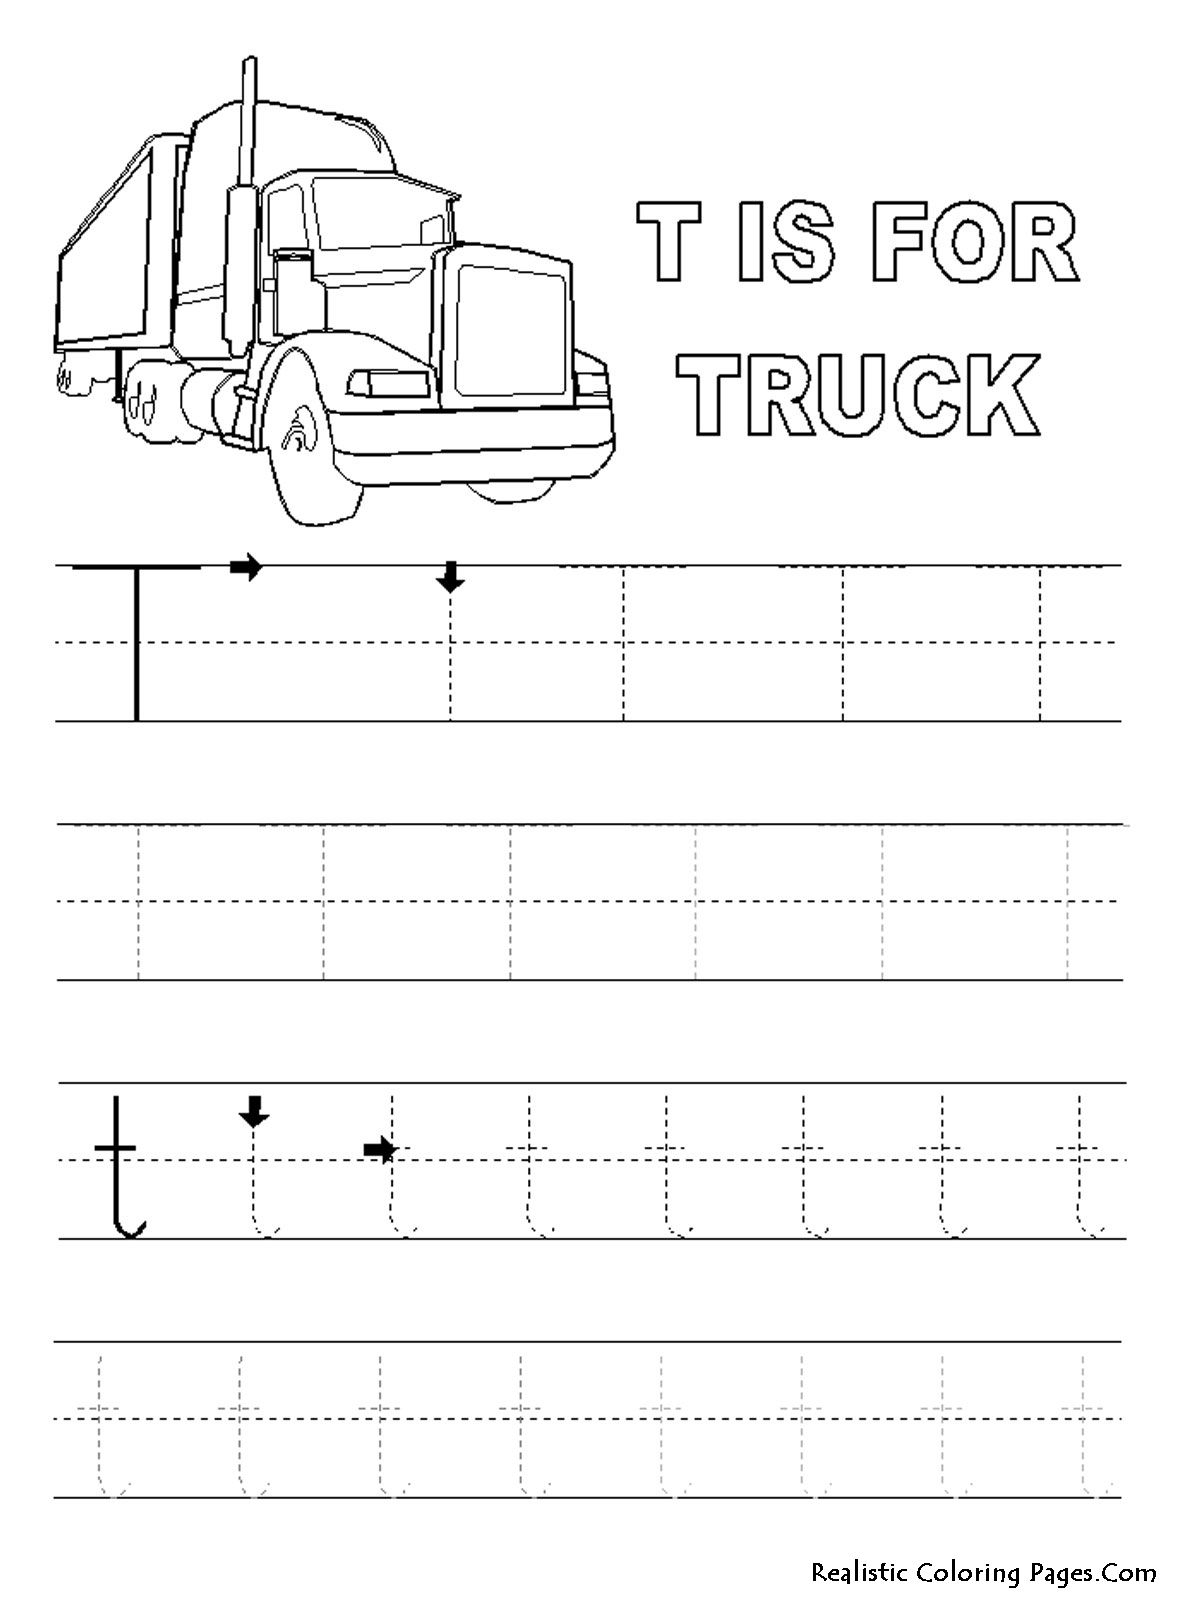 Letter T Worksheets And Coloring Pages For Preschoolers for Letter T Worksheets For Toddlers